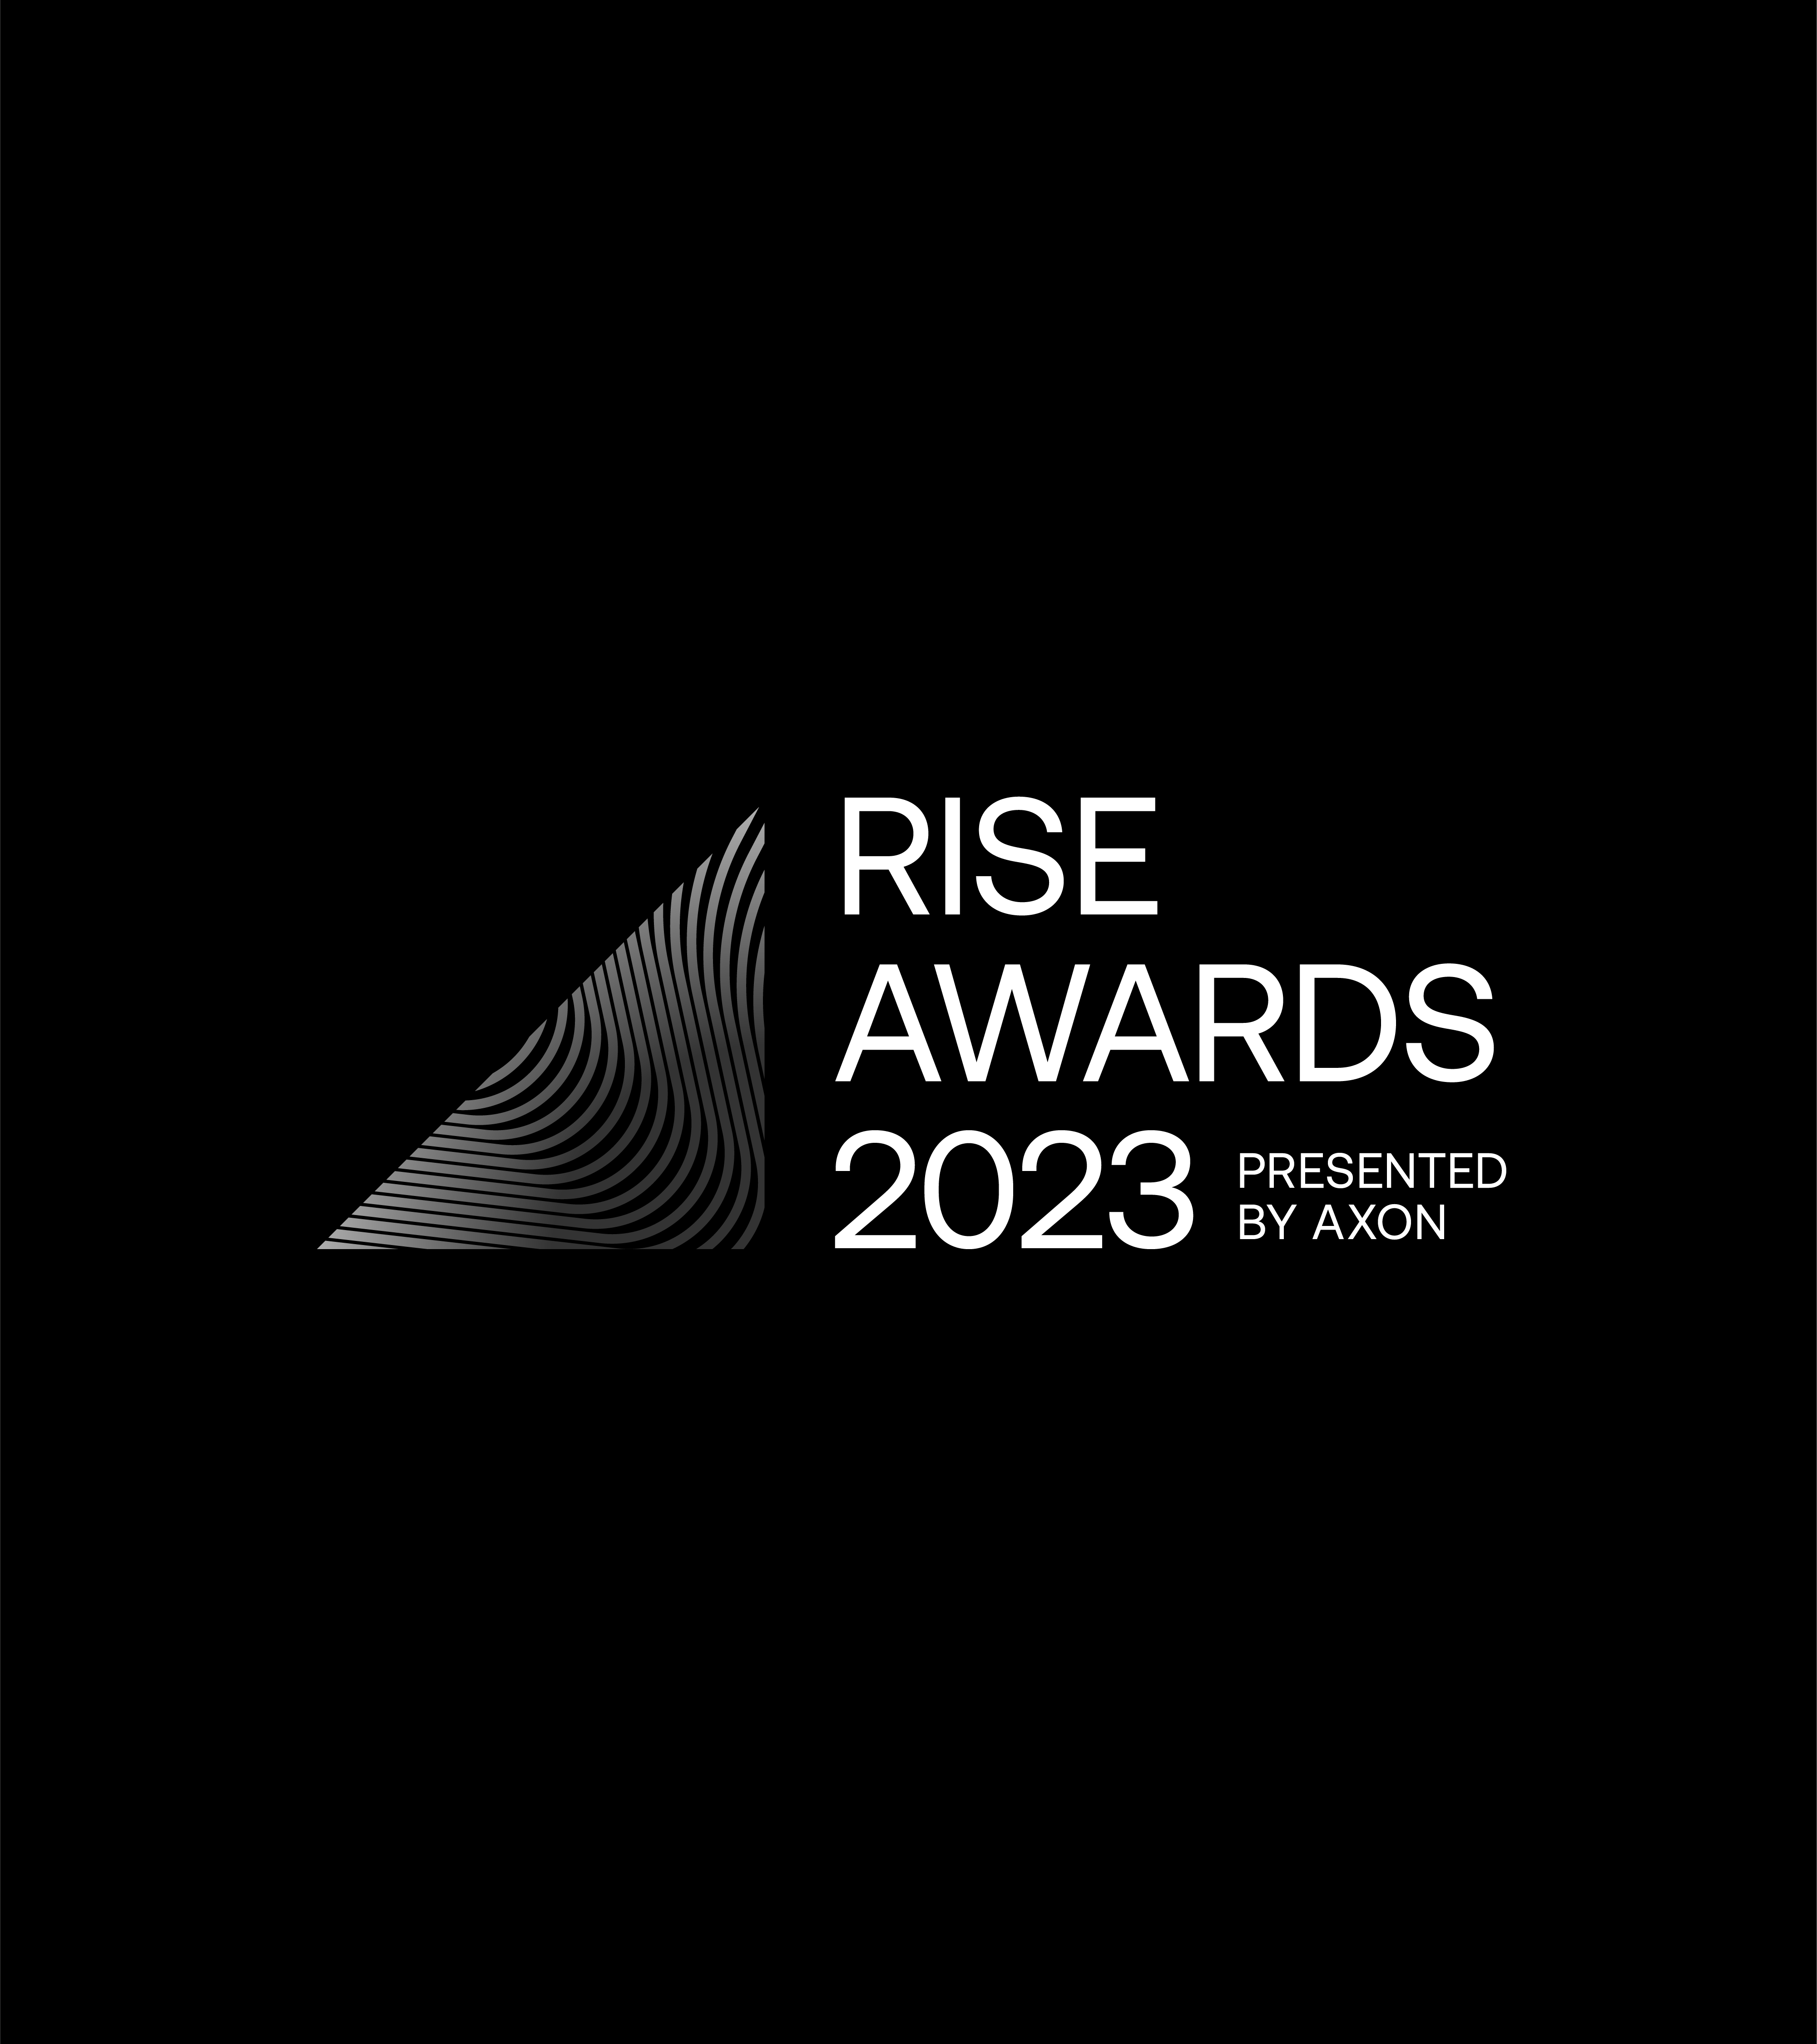 The 2023 RISE Awards Presented by Axon